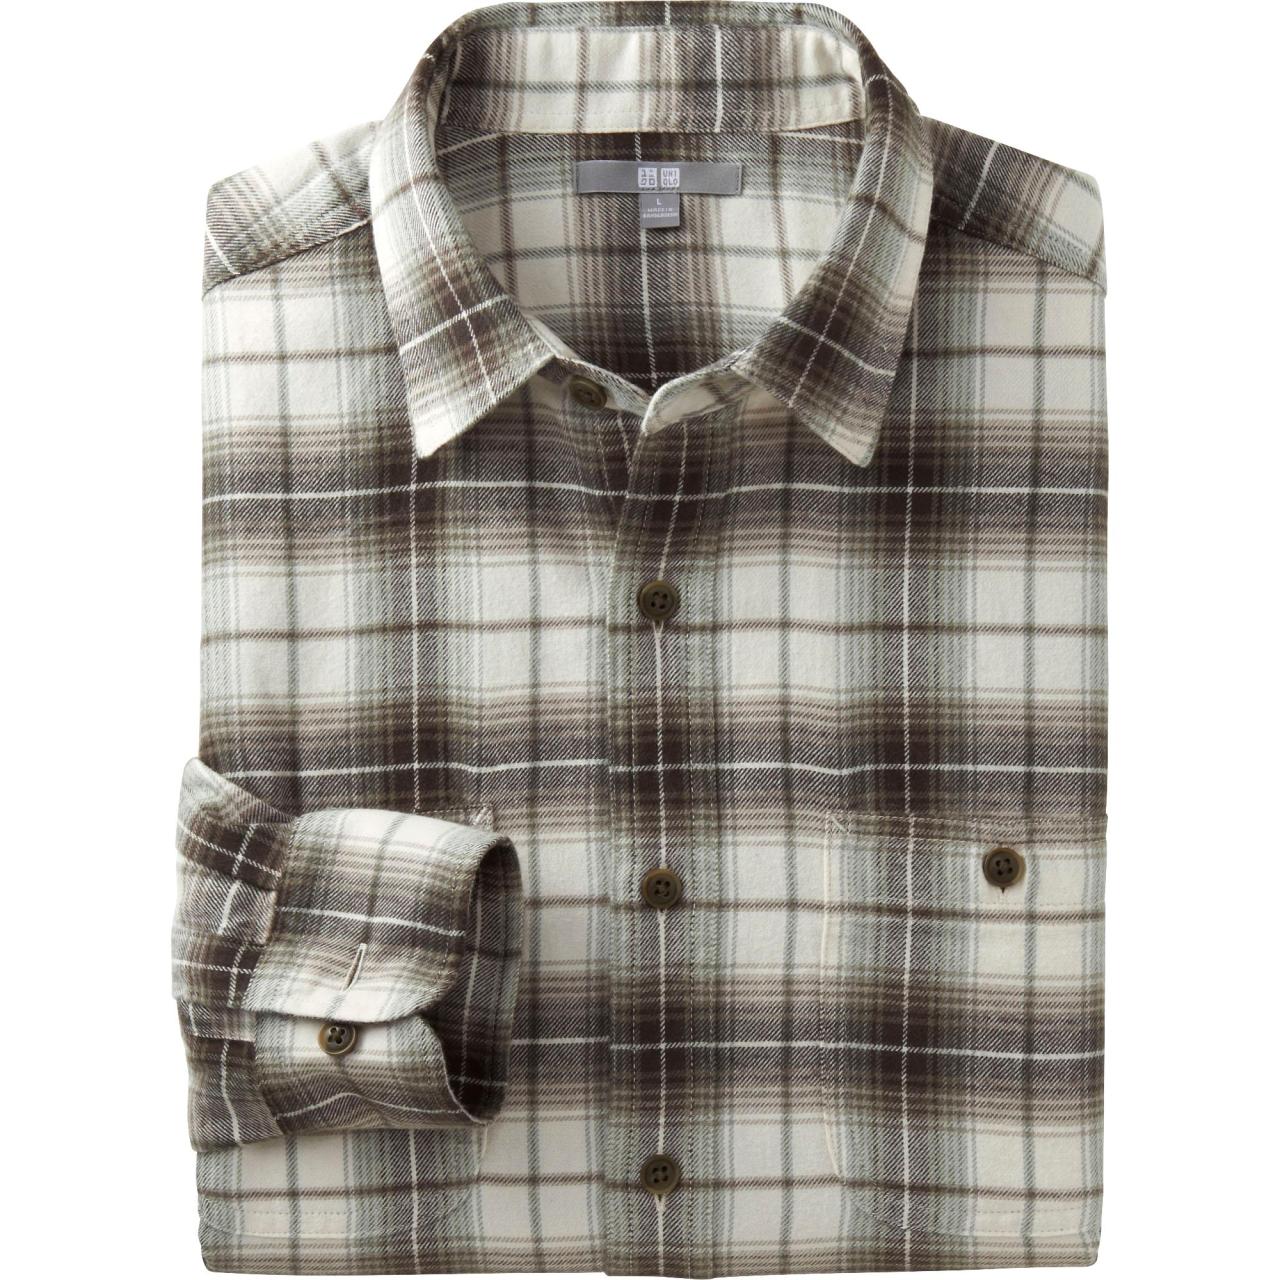 Uniqlo’s Flannels – Put This On